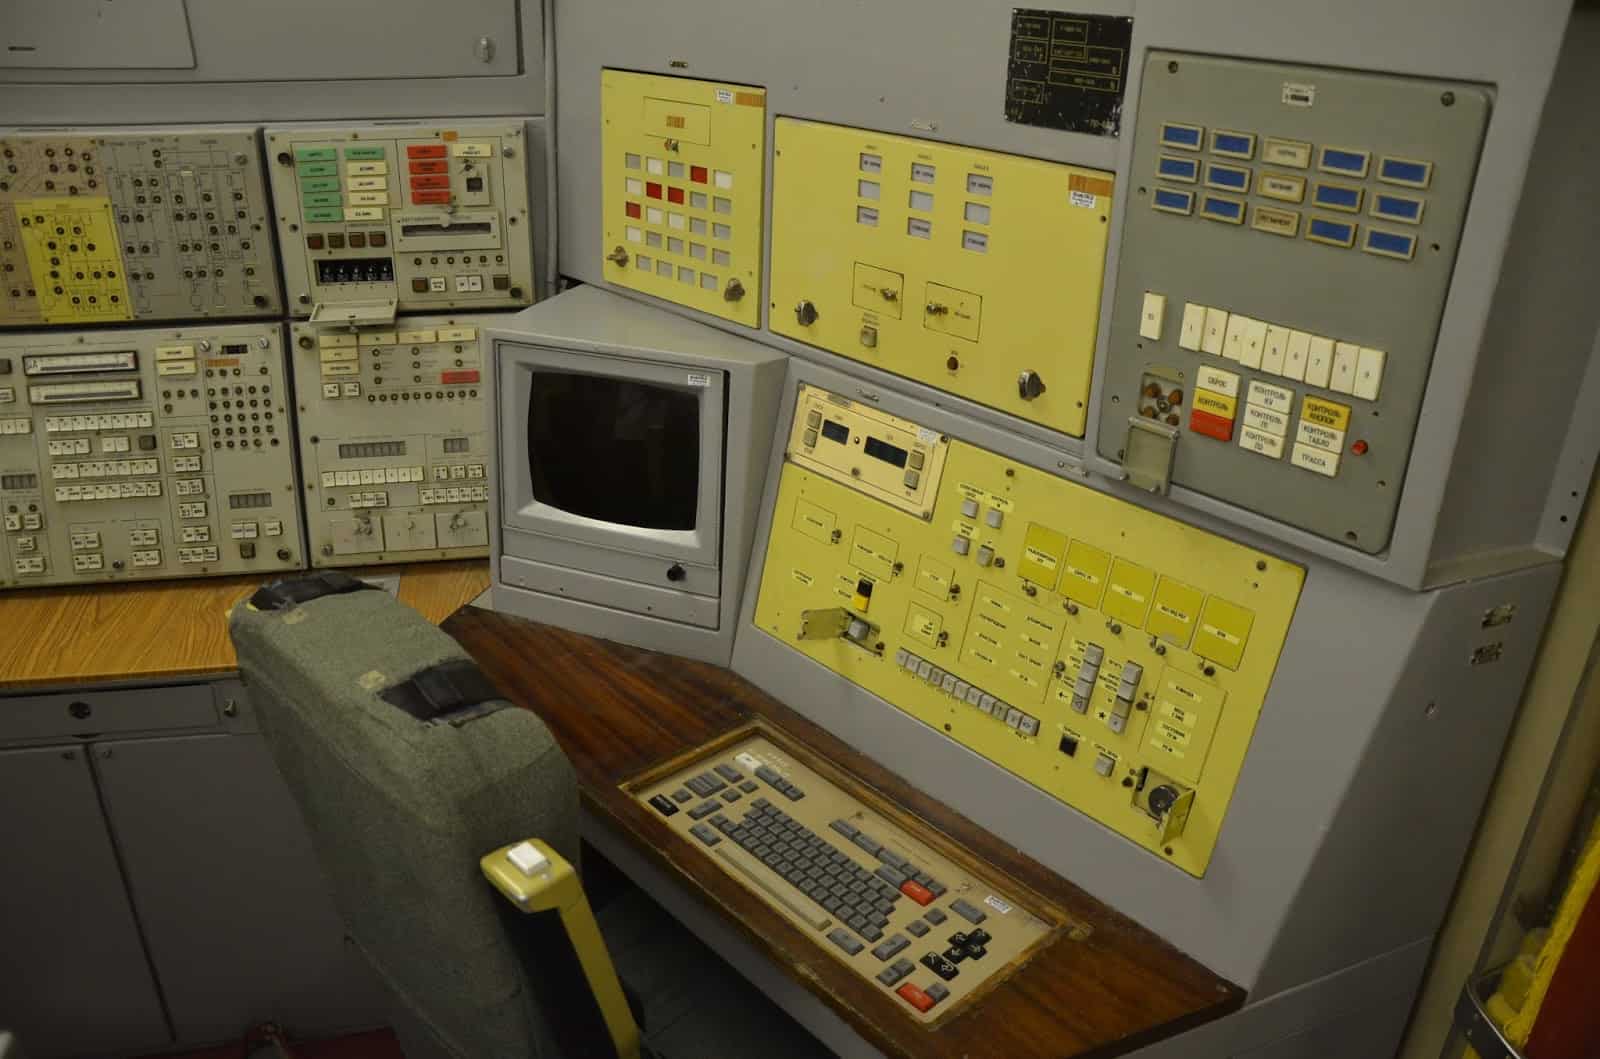 Command center in the Unified Command Center at Strategic Missile Forces Museum near Pobuzke, Ukraine